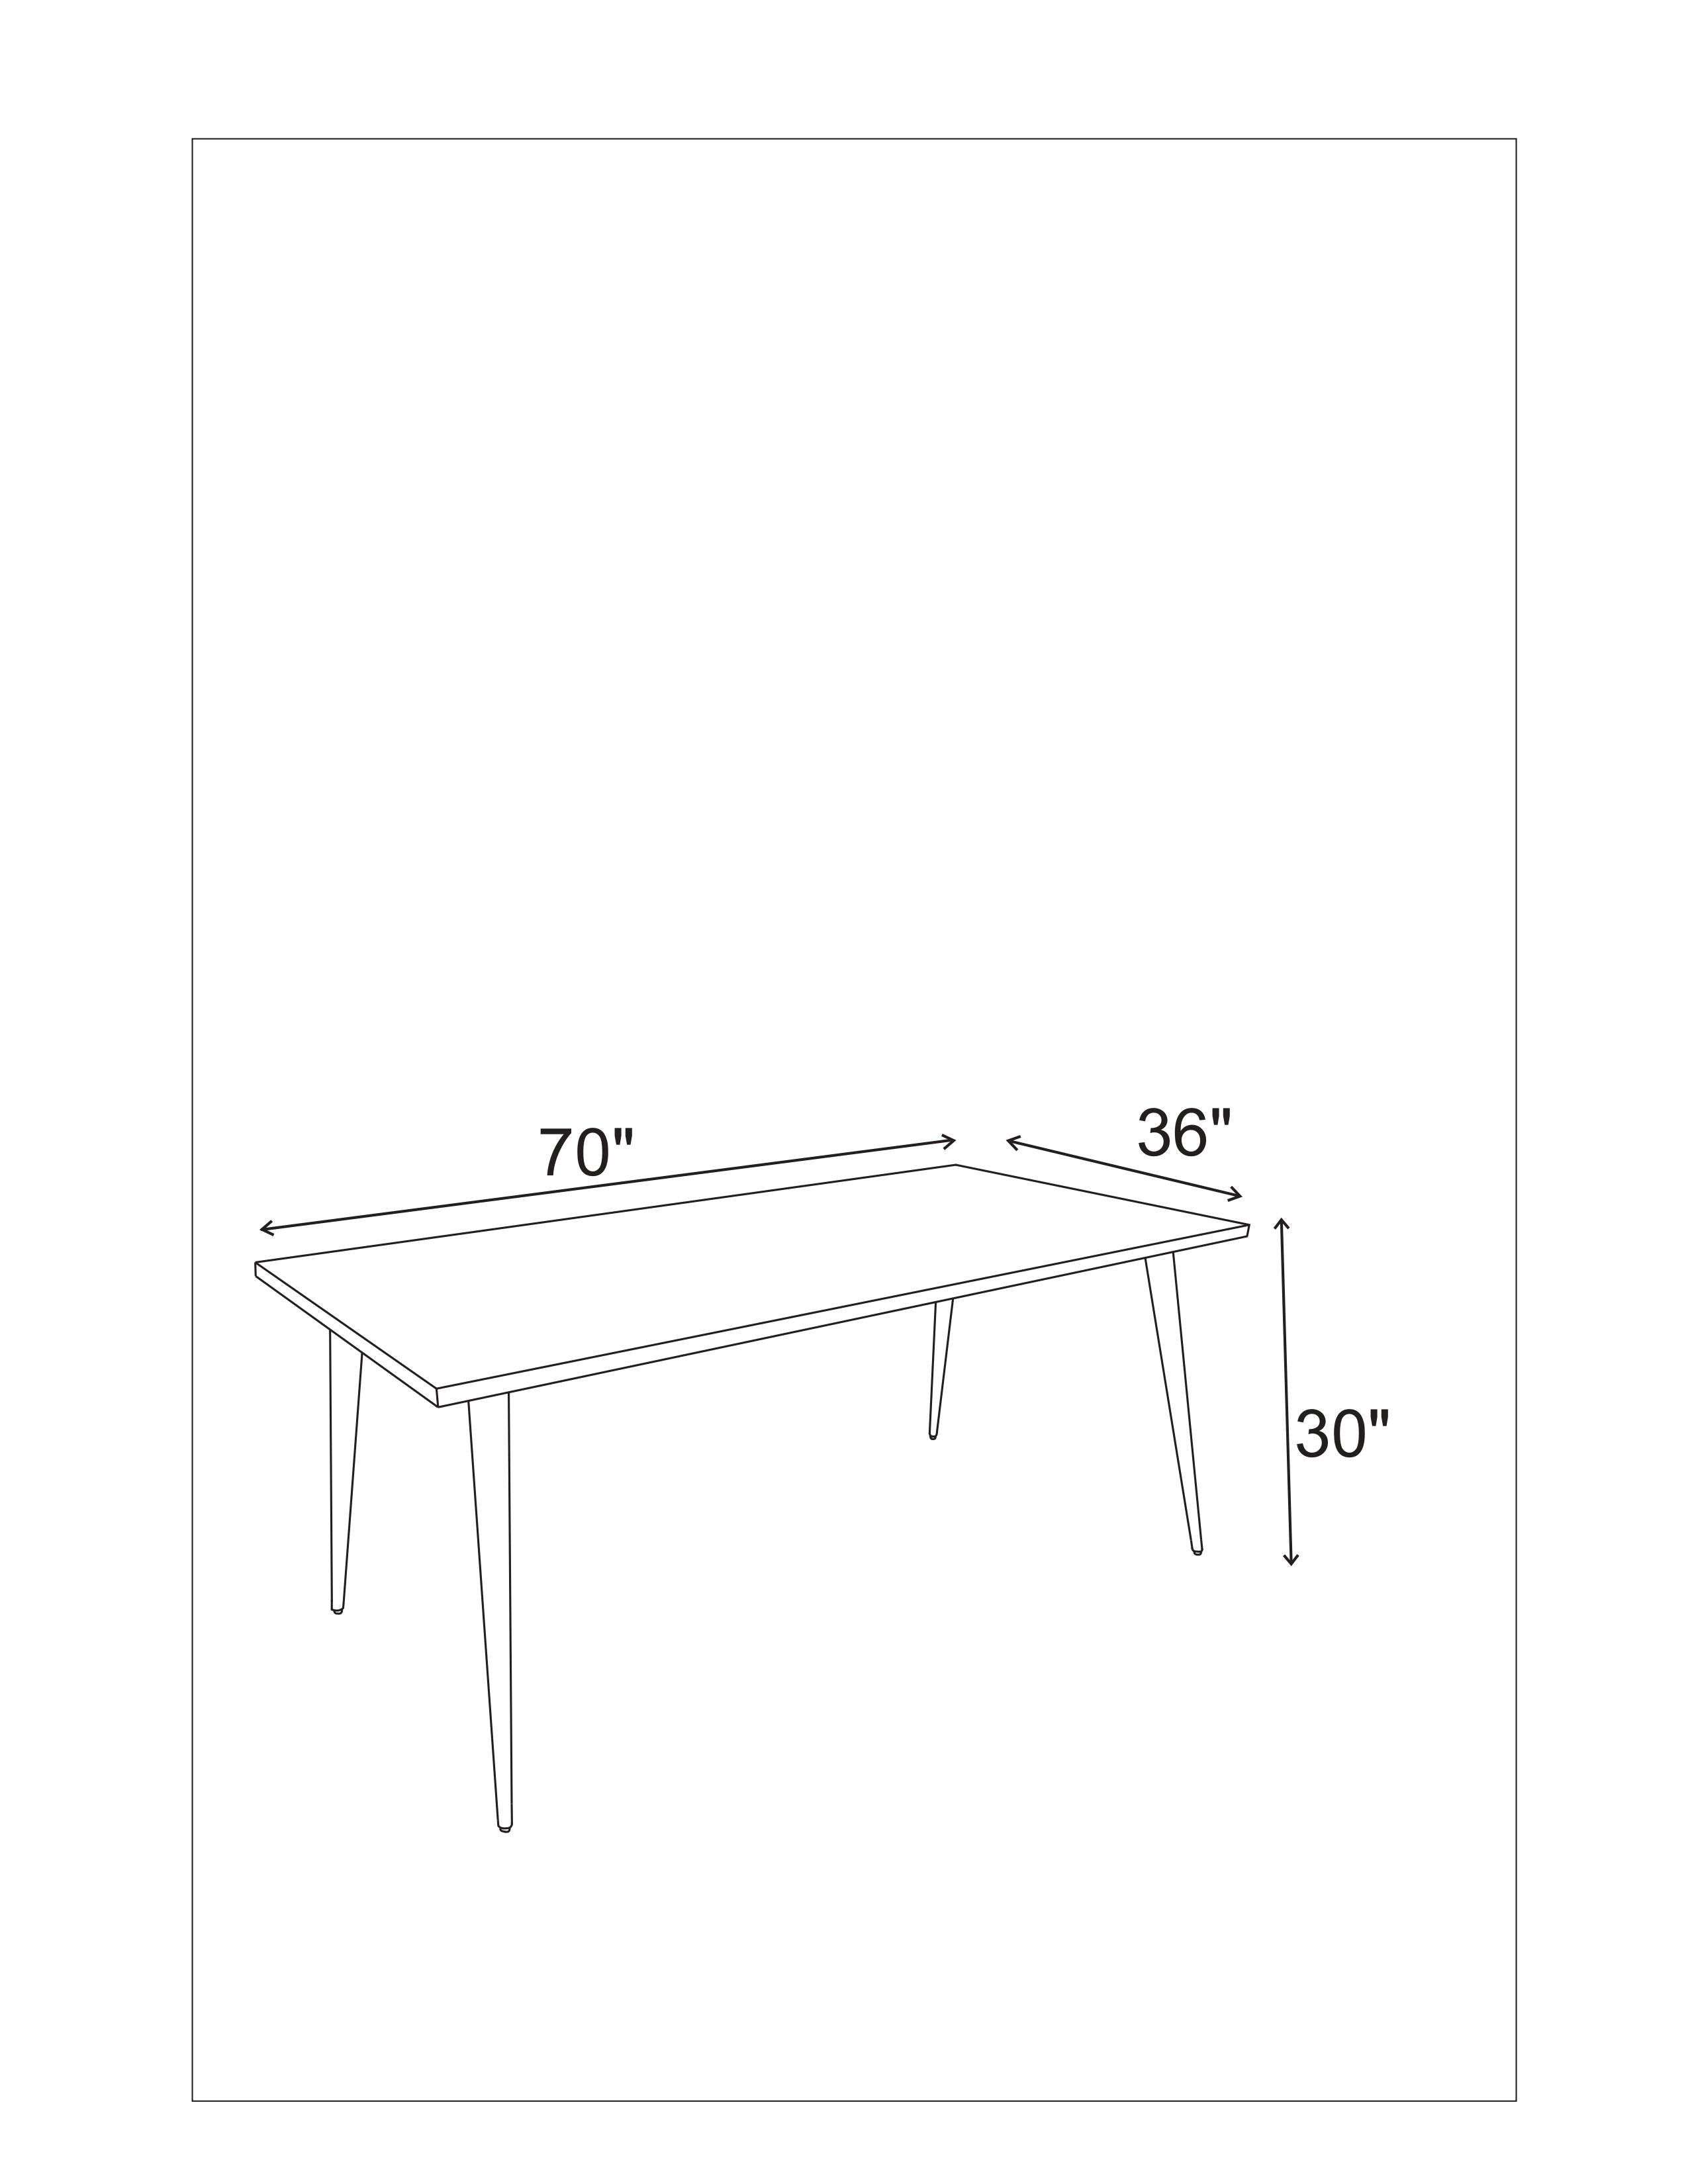 Main Solid Wood Dining Table (70") - Natural